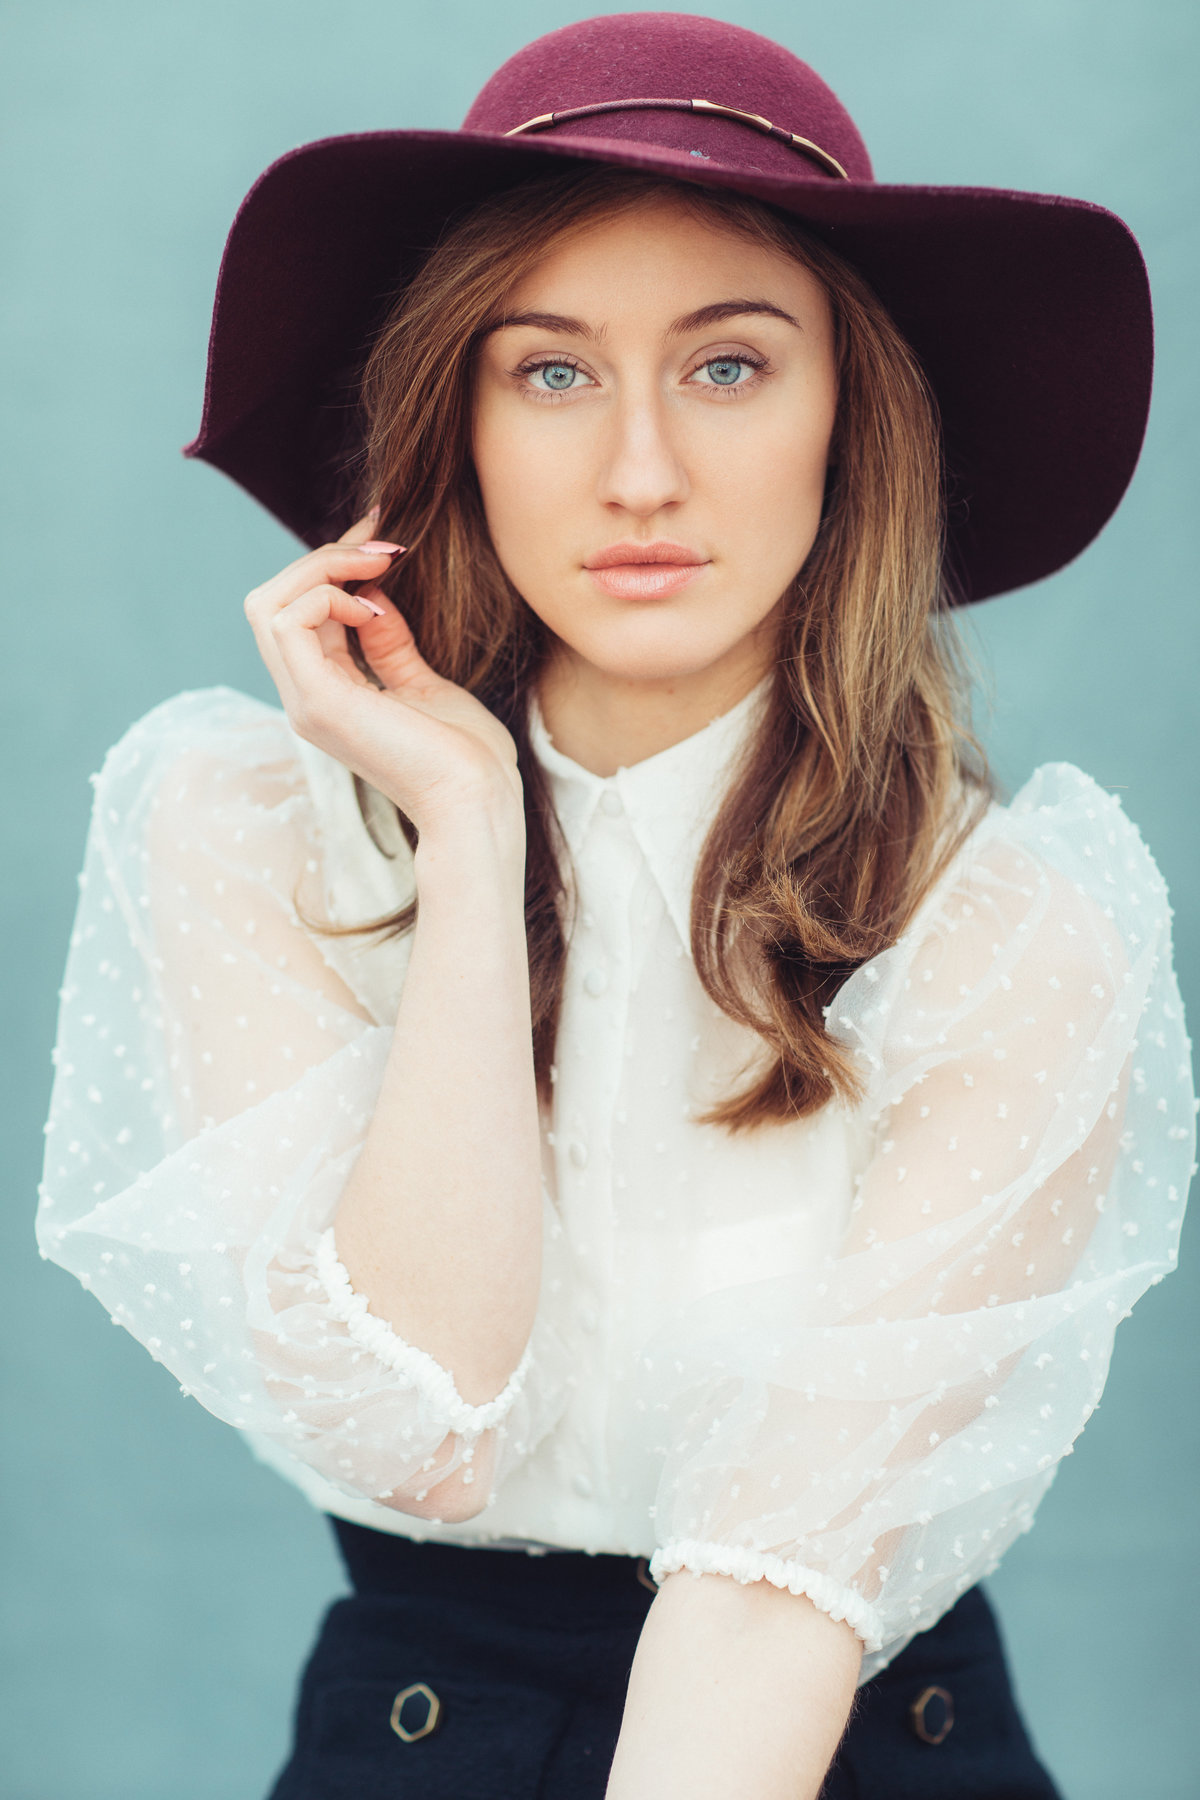 Portrait Photo Of Young Woman In White Blouse And Red Hat Los Angeles